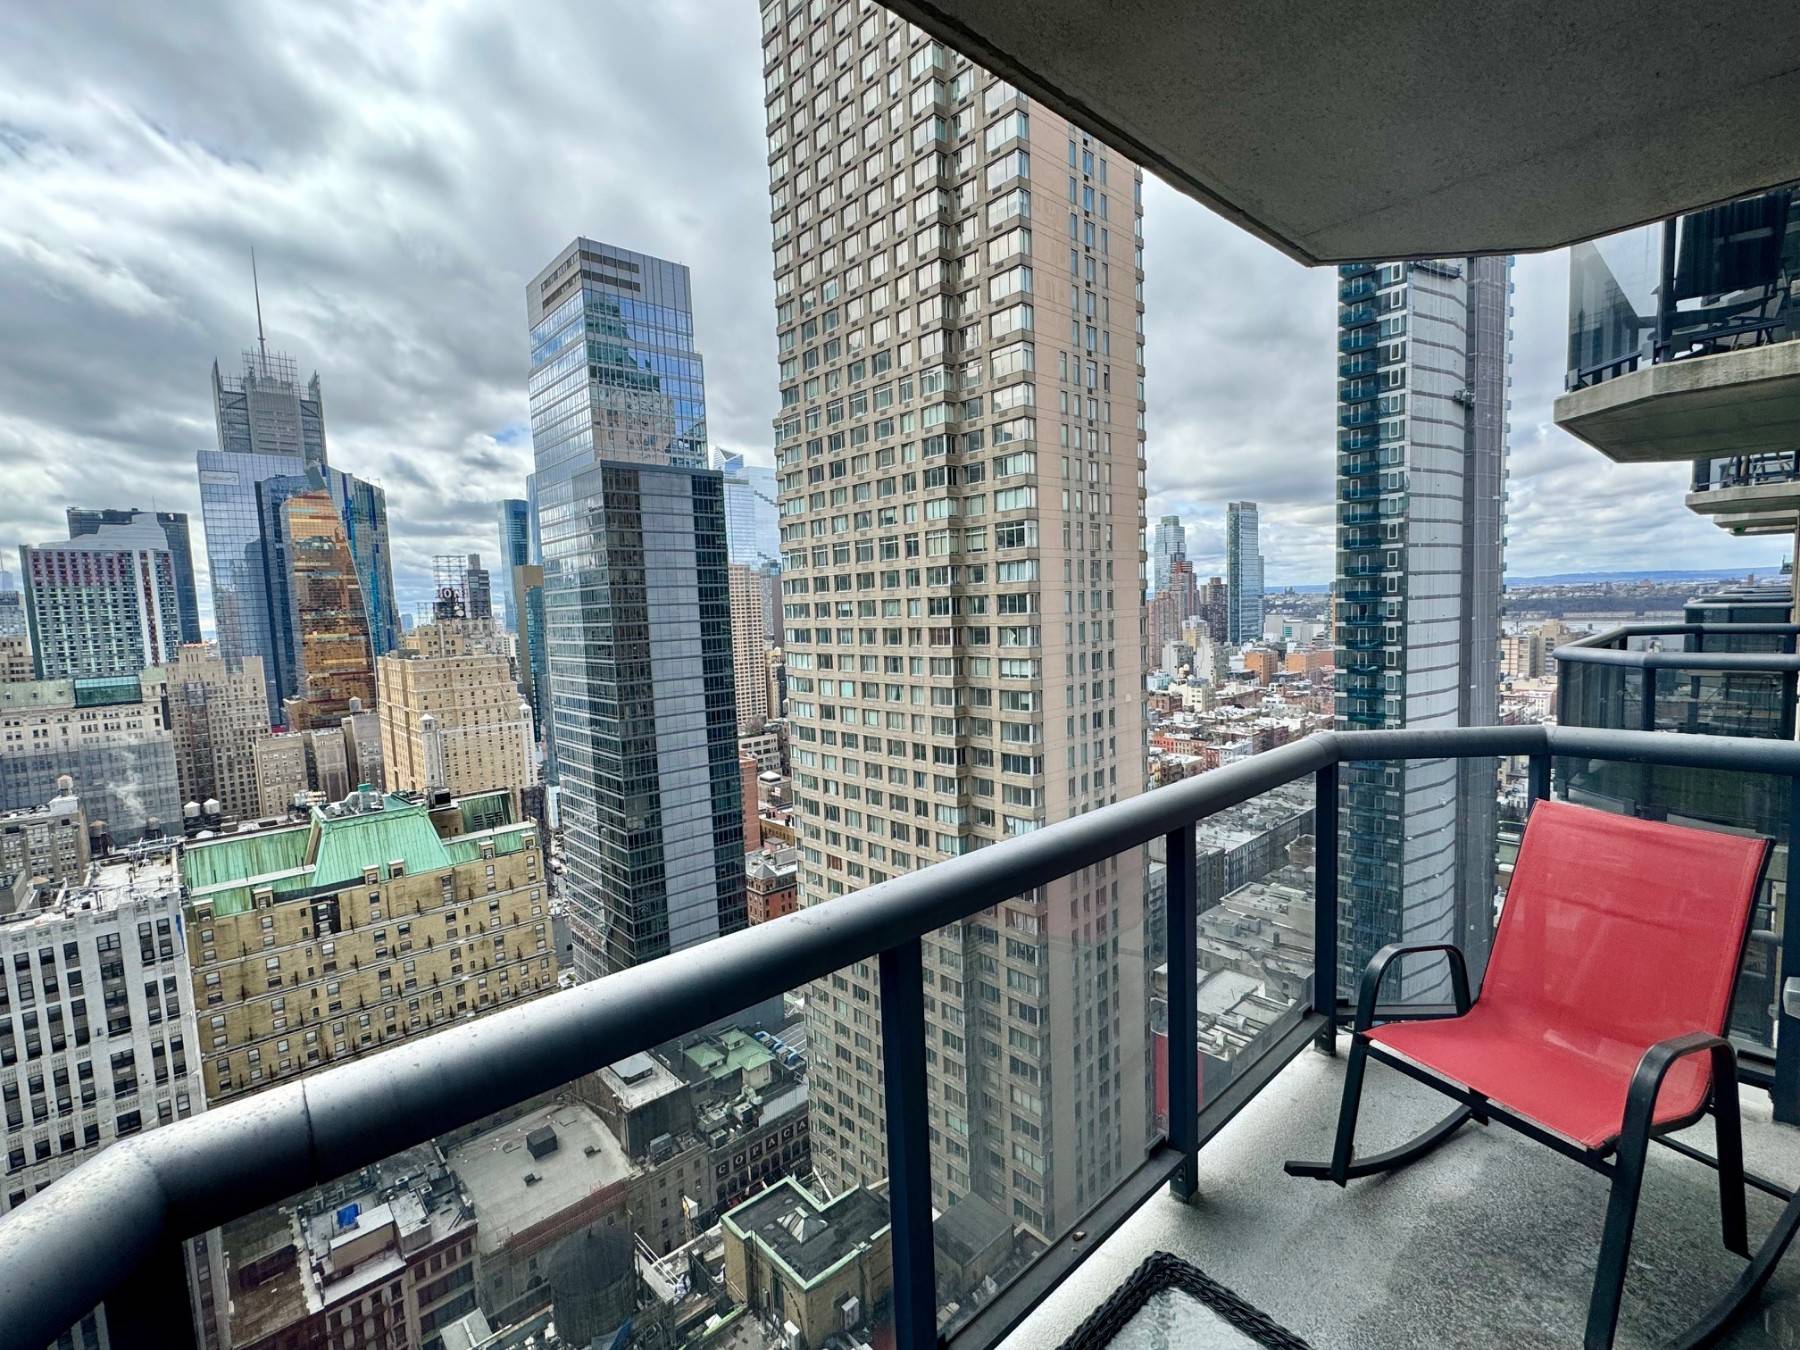 Newly renovated South facing studio apartment on 33rd floor with great city views and a private balcony.